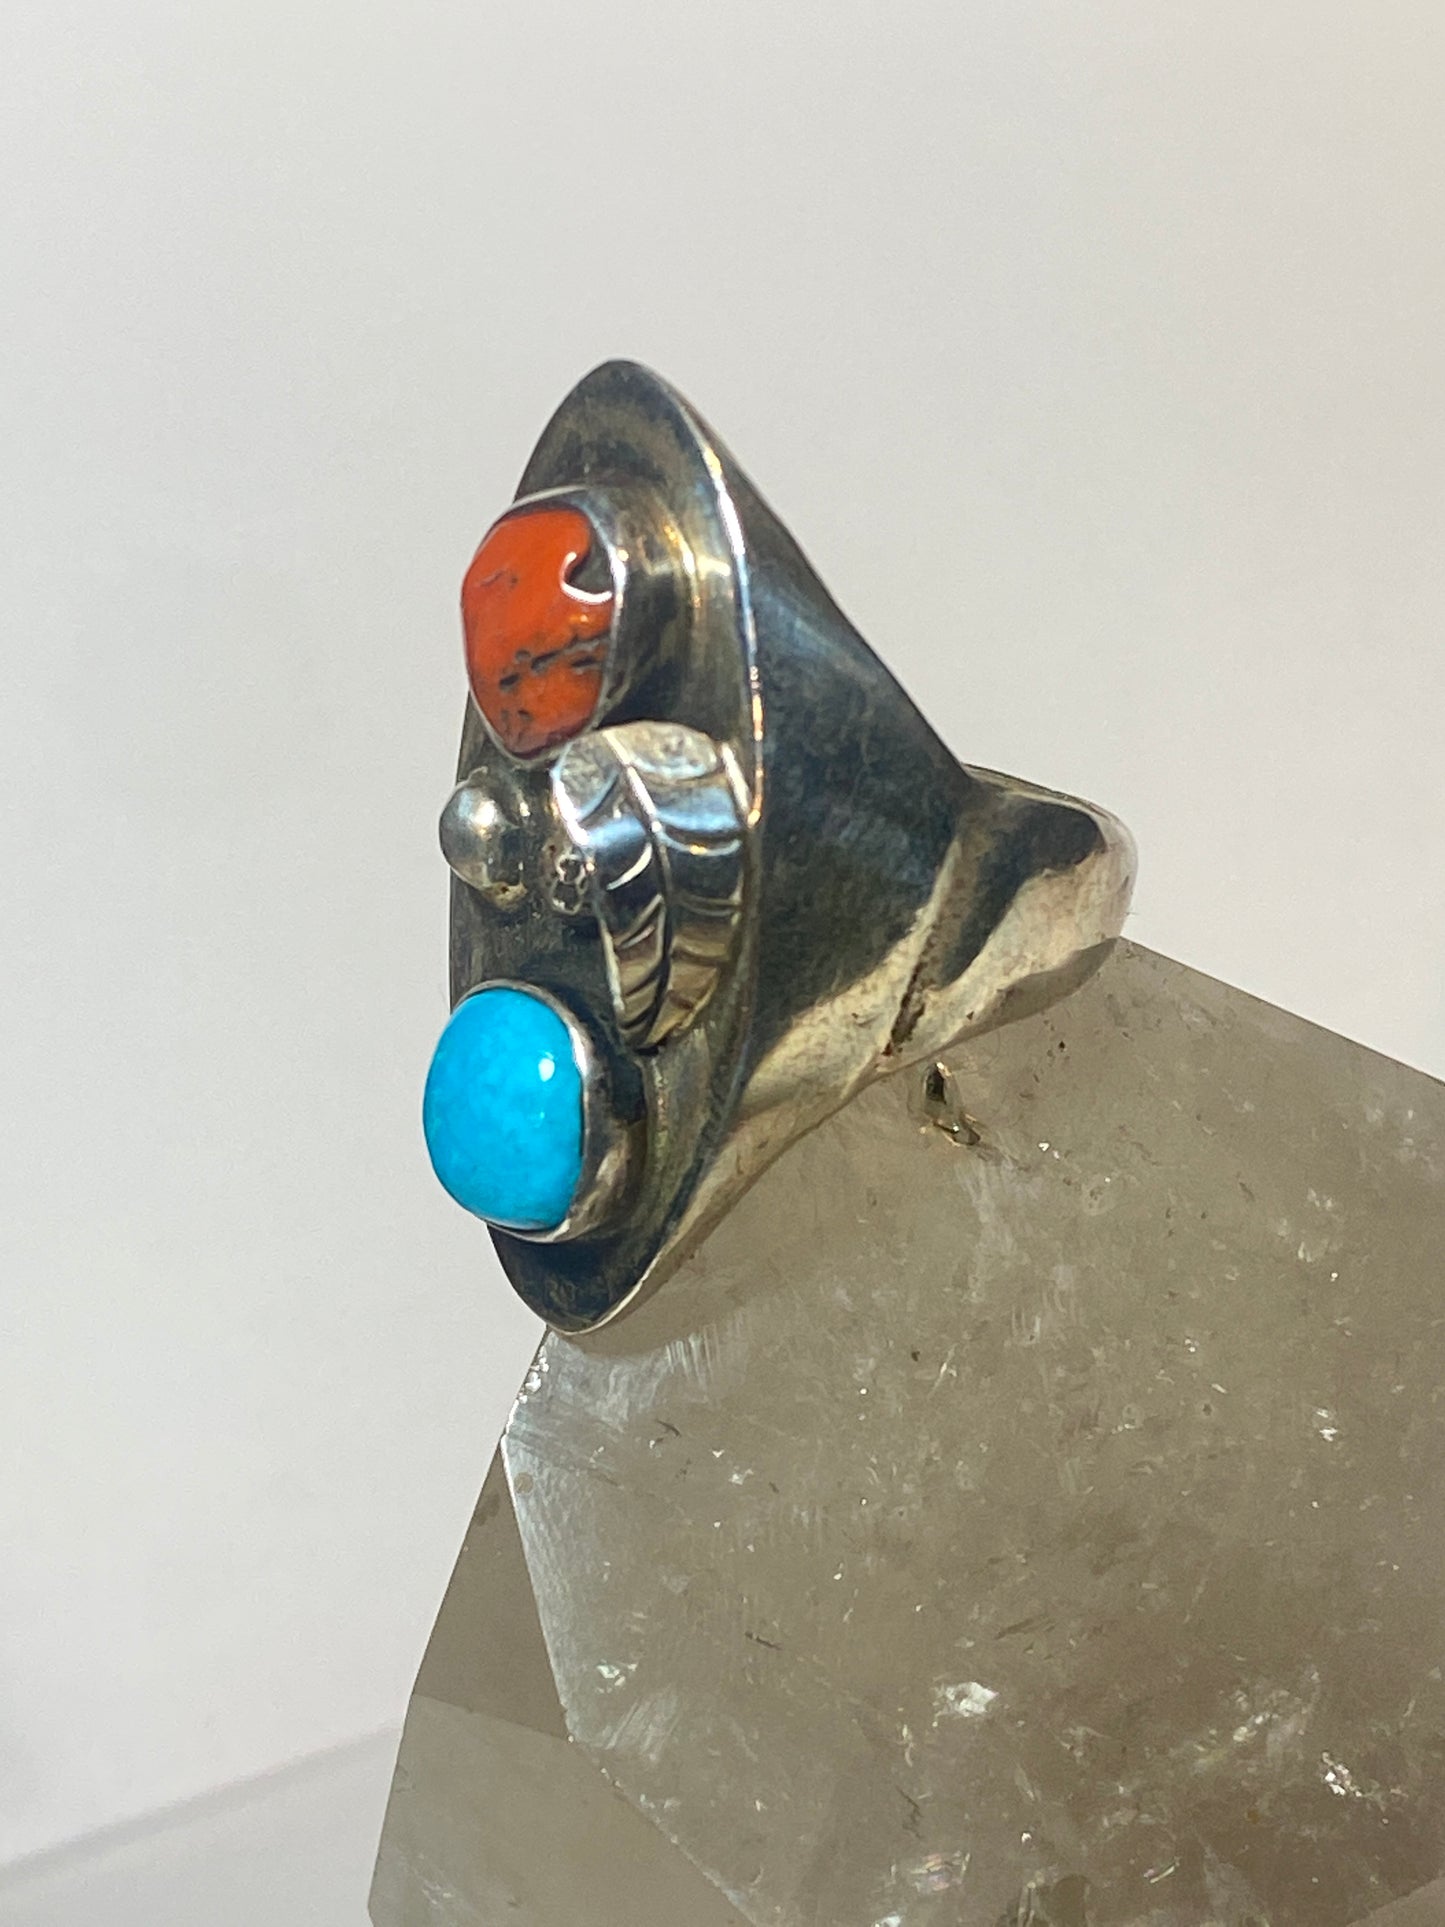 Navajo ring turquoise coral sterling silver men women  g